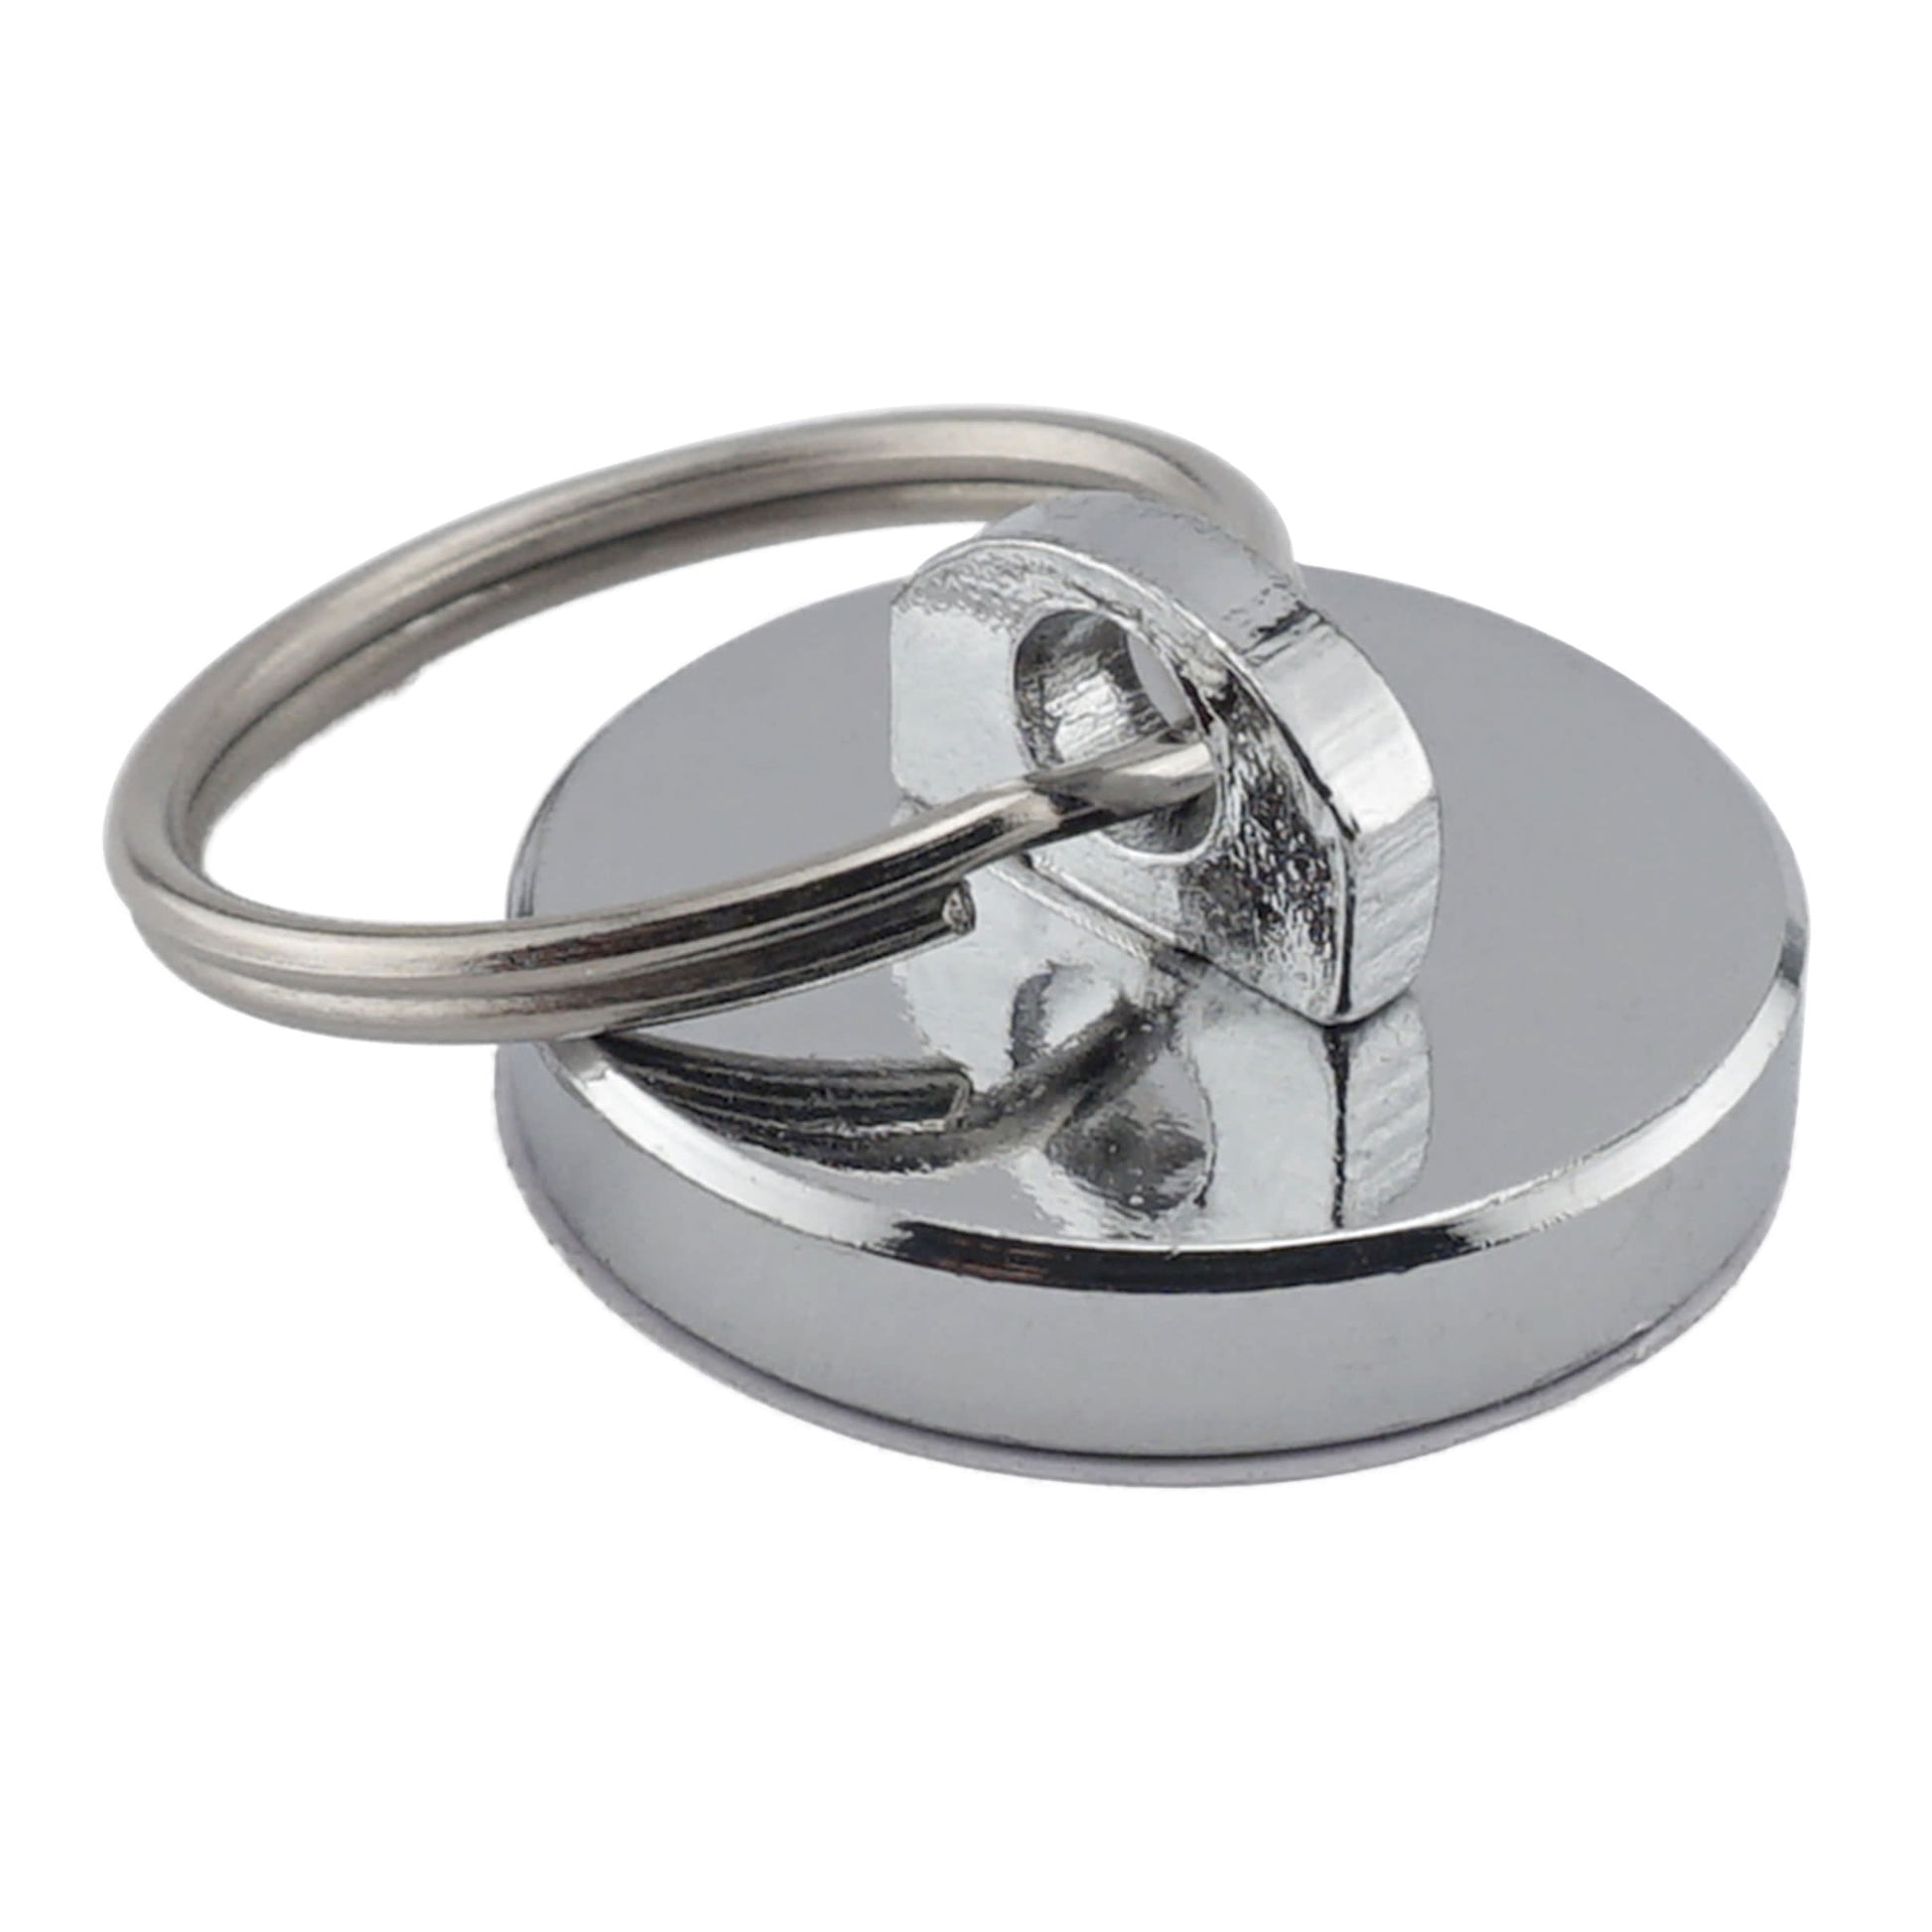 Load image into Gallery viewer, 07287 Neodymium Magnetic Keyring - 45 Degree Angle View